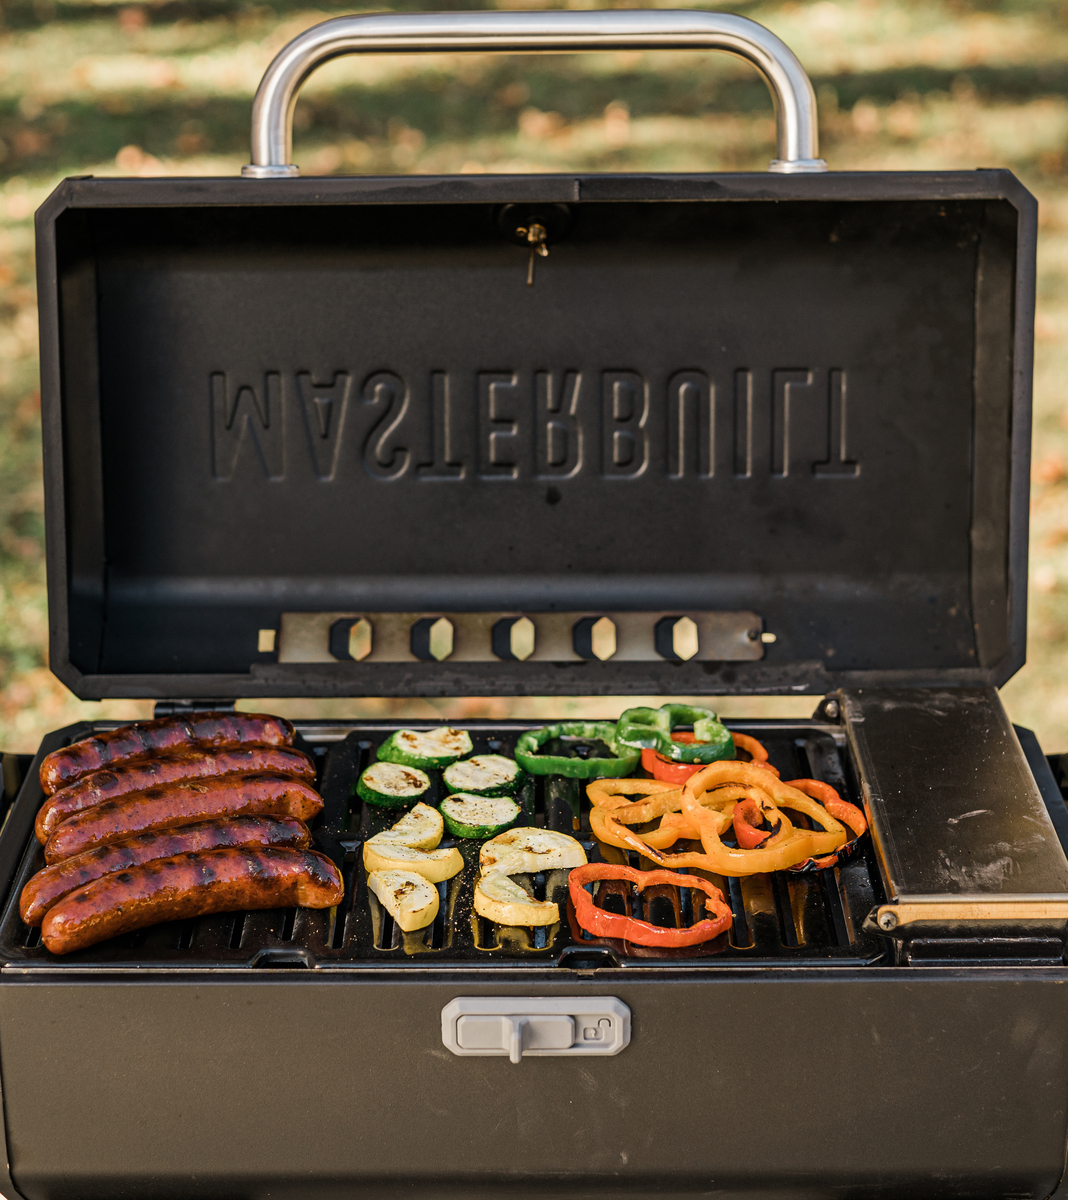 Masterbuilt Portable Charcoal Grill cooking